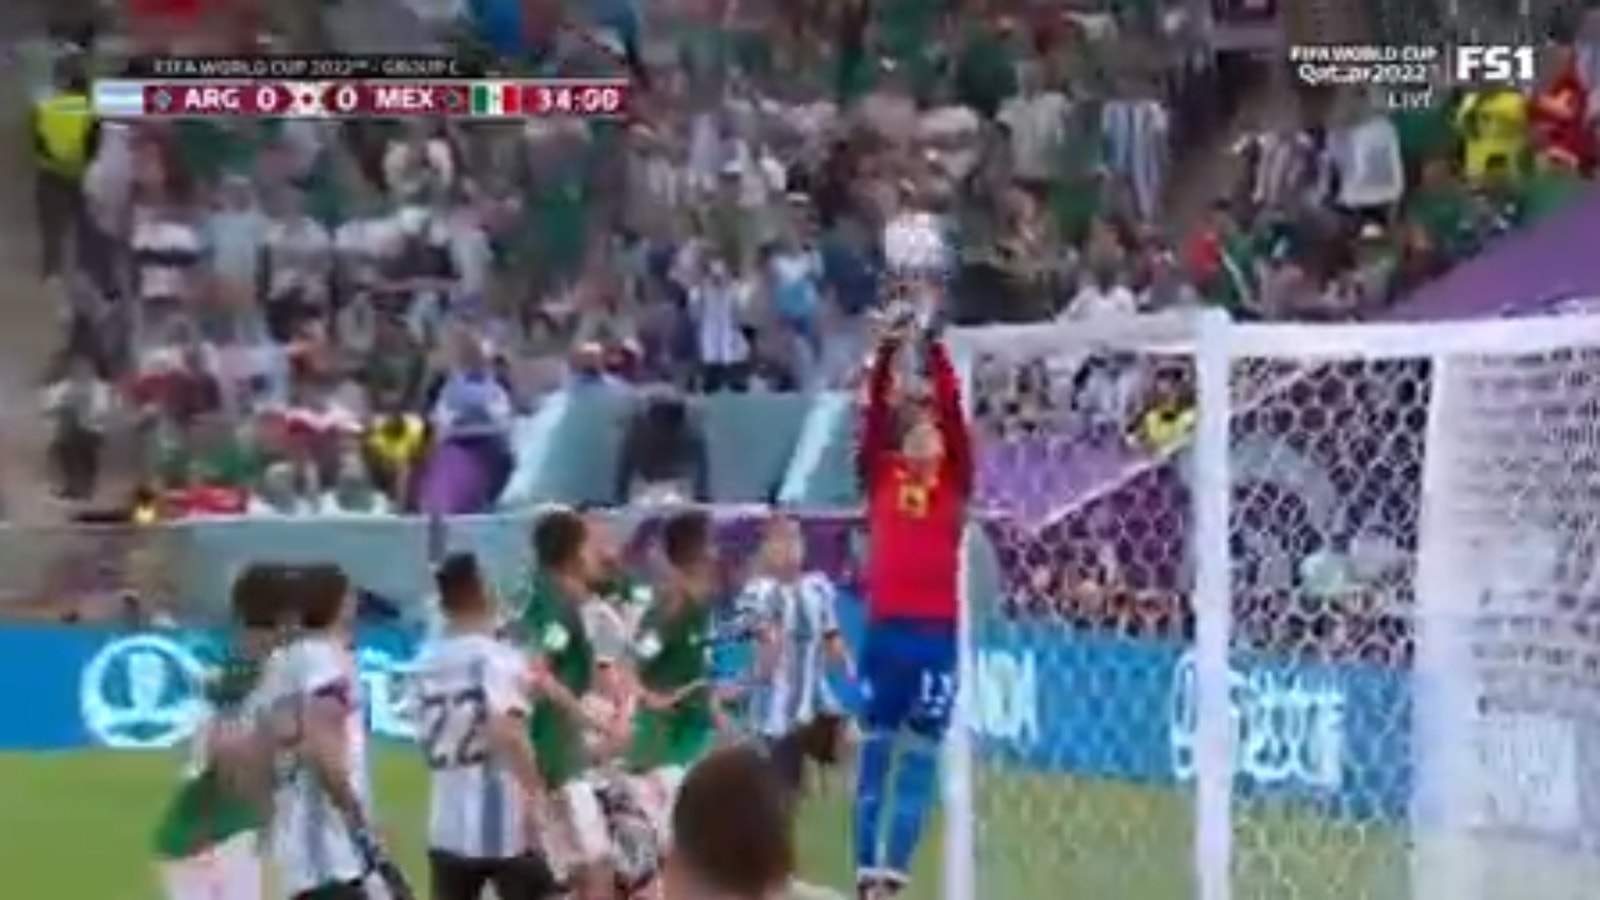 Argentina's Lionel Messi on the verge of scoring his first goal of the match, knocked away by Ochoa